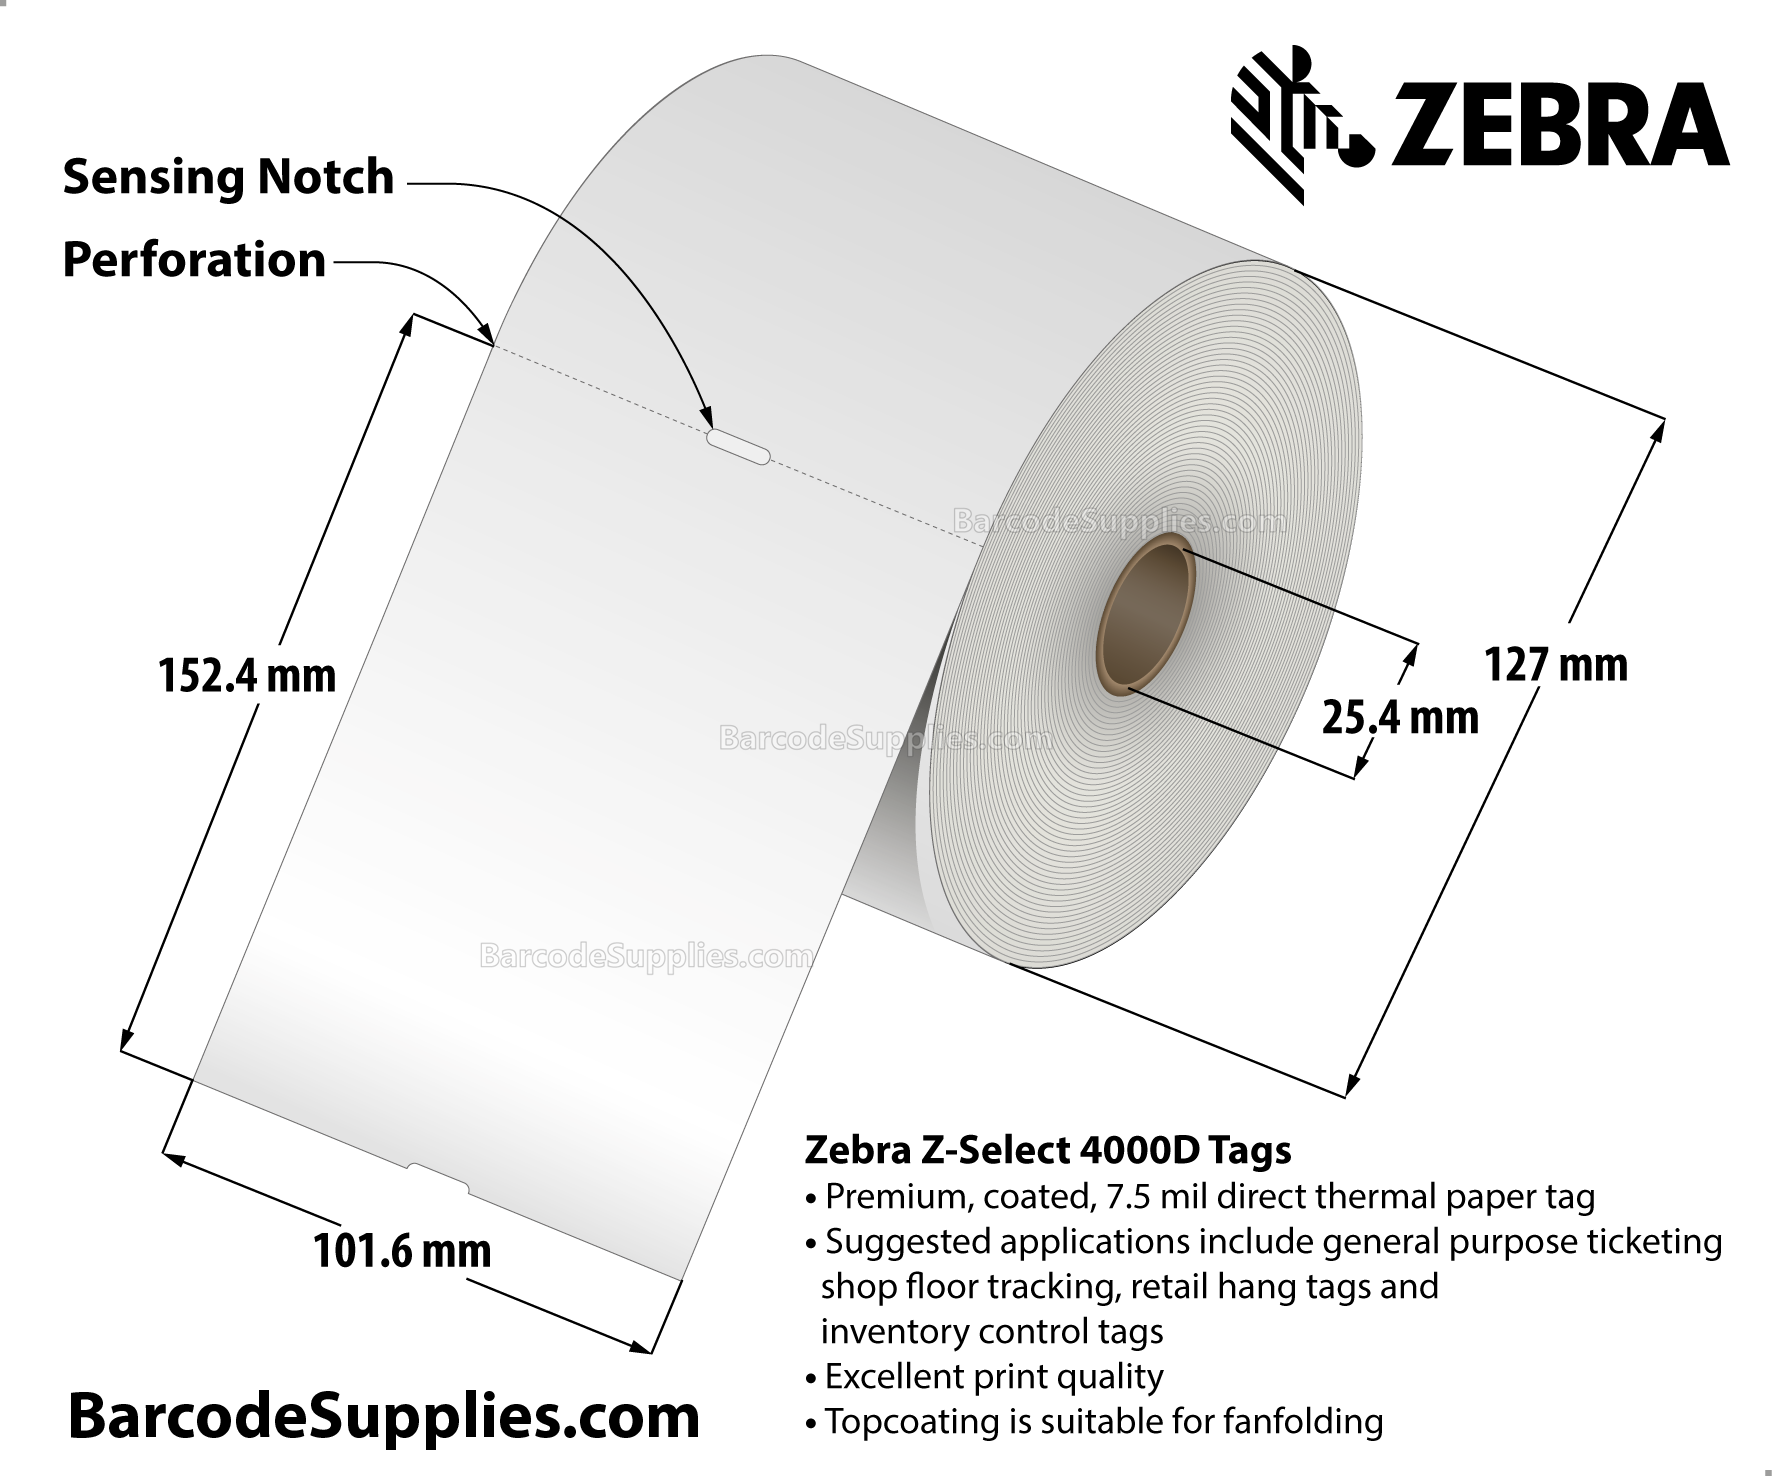 4 x 6 Direct Thermal White Z-Select 4000D 7 mil Tag Tags With No Adhesive - Contains sensing notch - Perforated - 365 Tags Per Roll - Carton Of 4 Rolls - 1460 Tags Total - MPN: 10015364